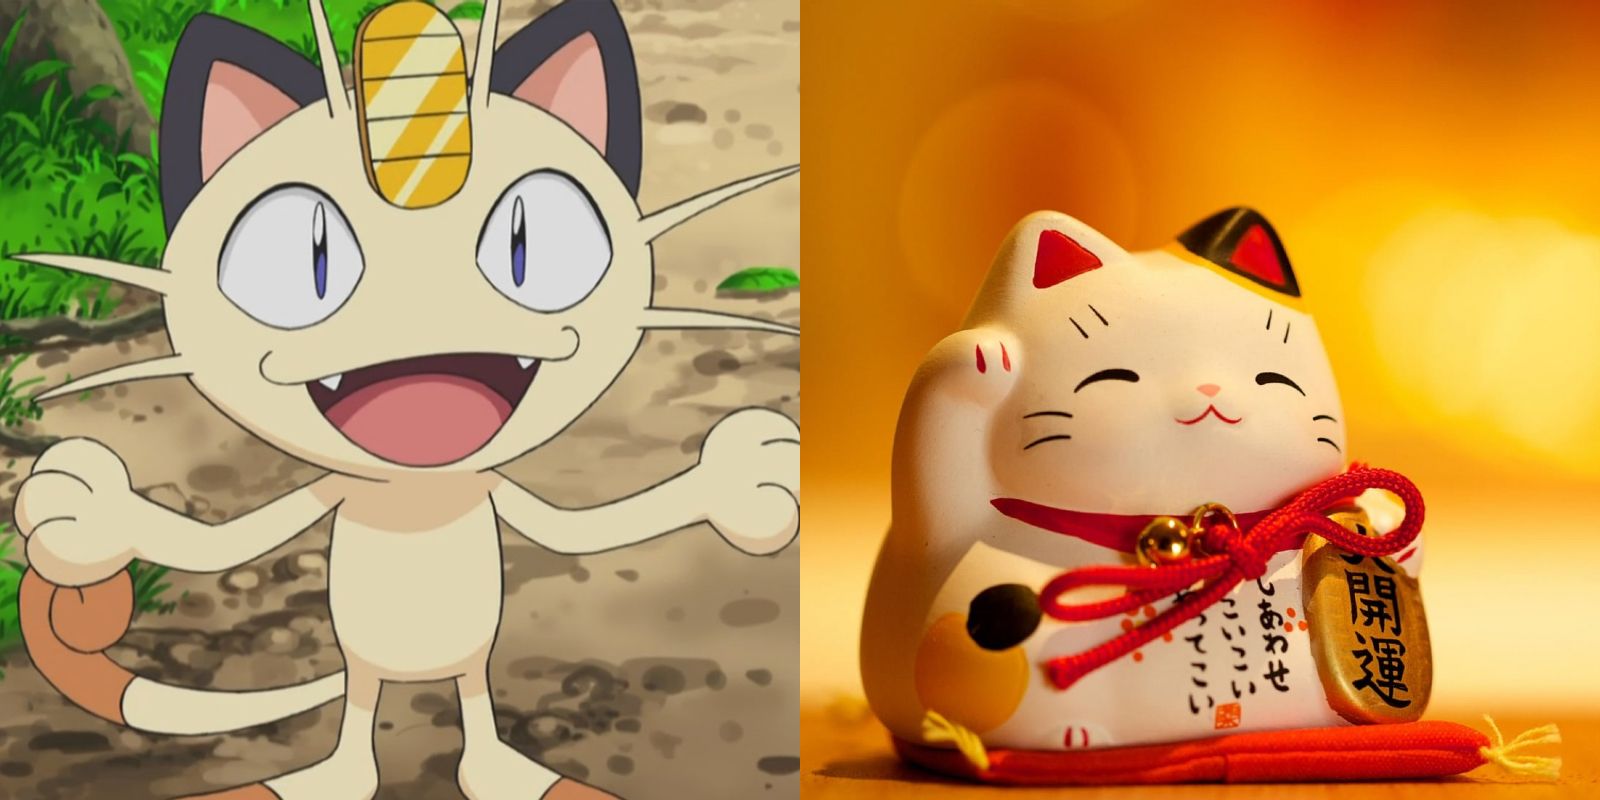 There are many possible origins for Meowth's inspiration, the maneki-neko figurines.